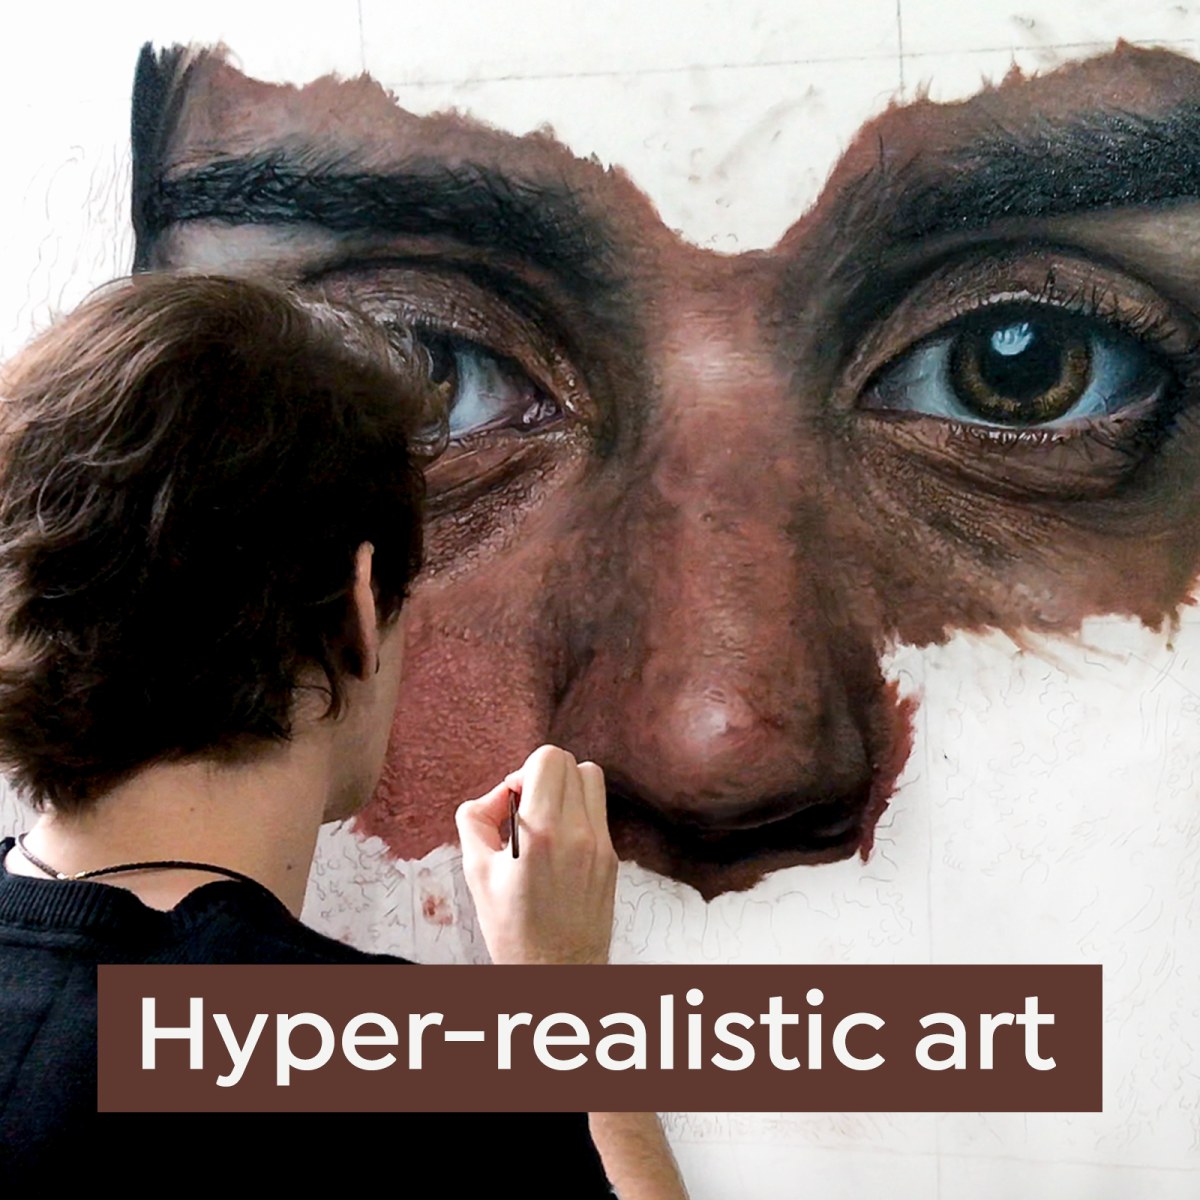 WHAT DOES HYPERREALISTIC EVEN MEAN